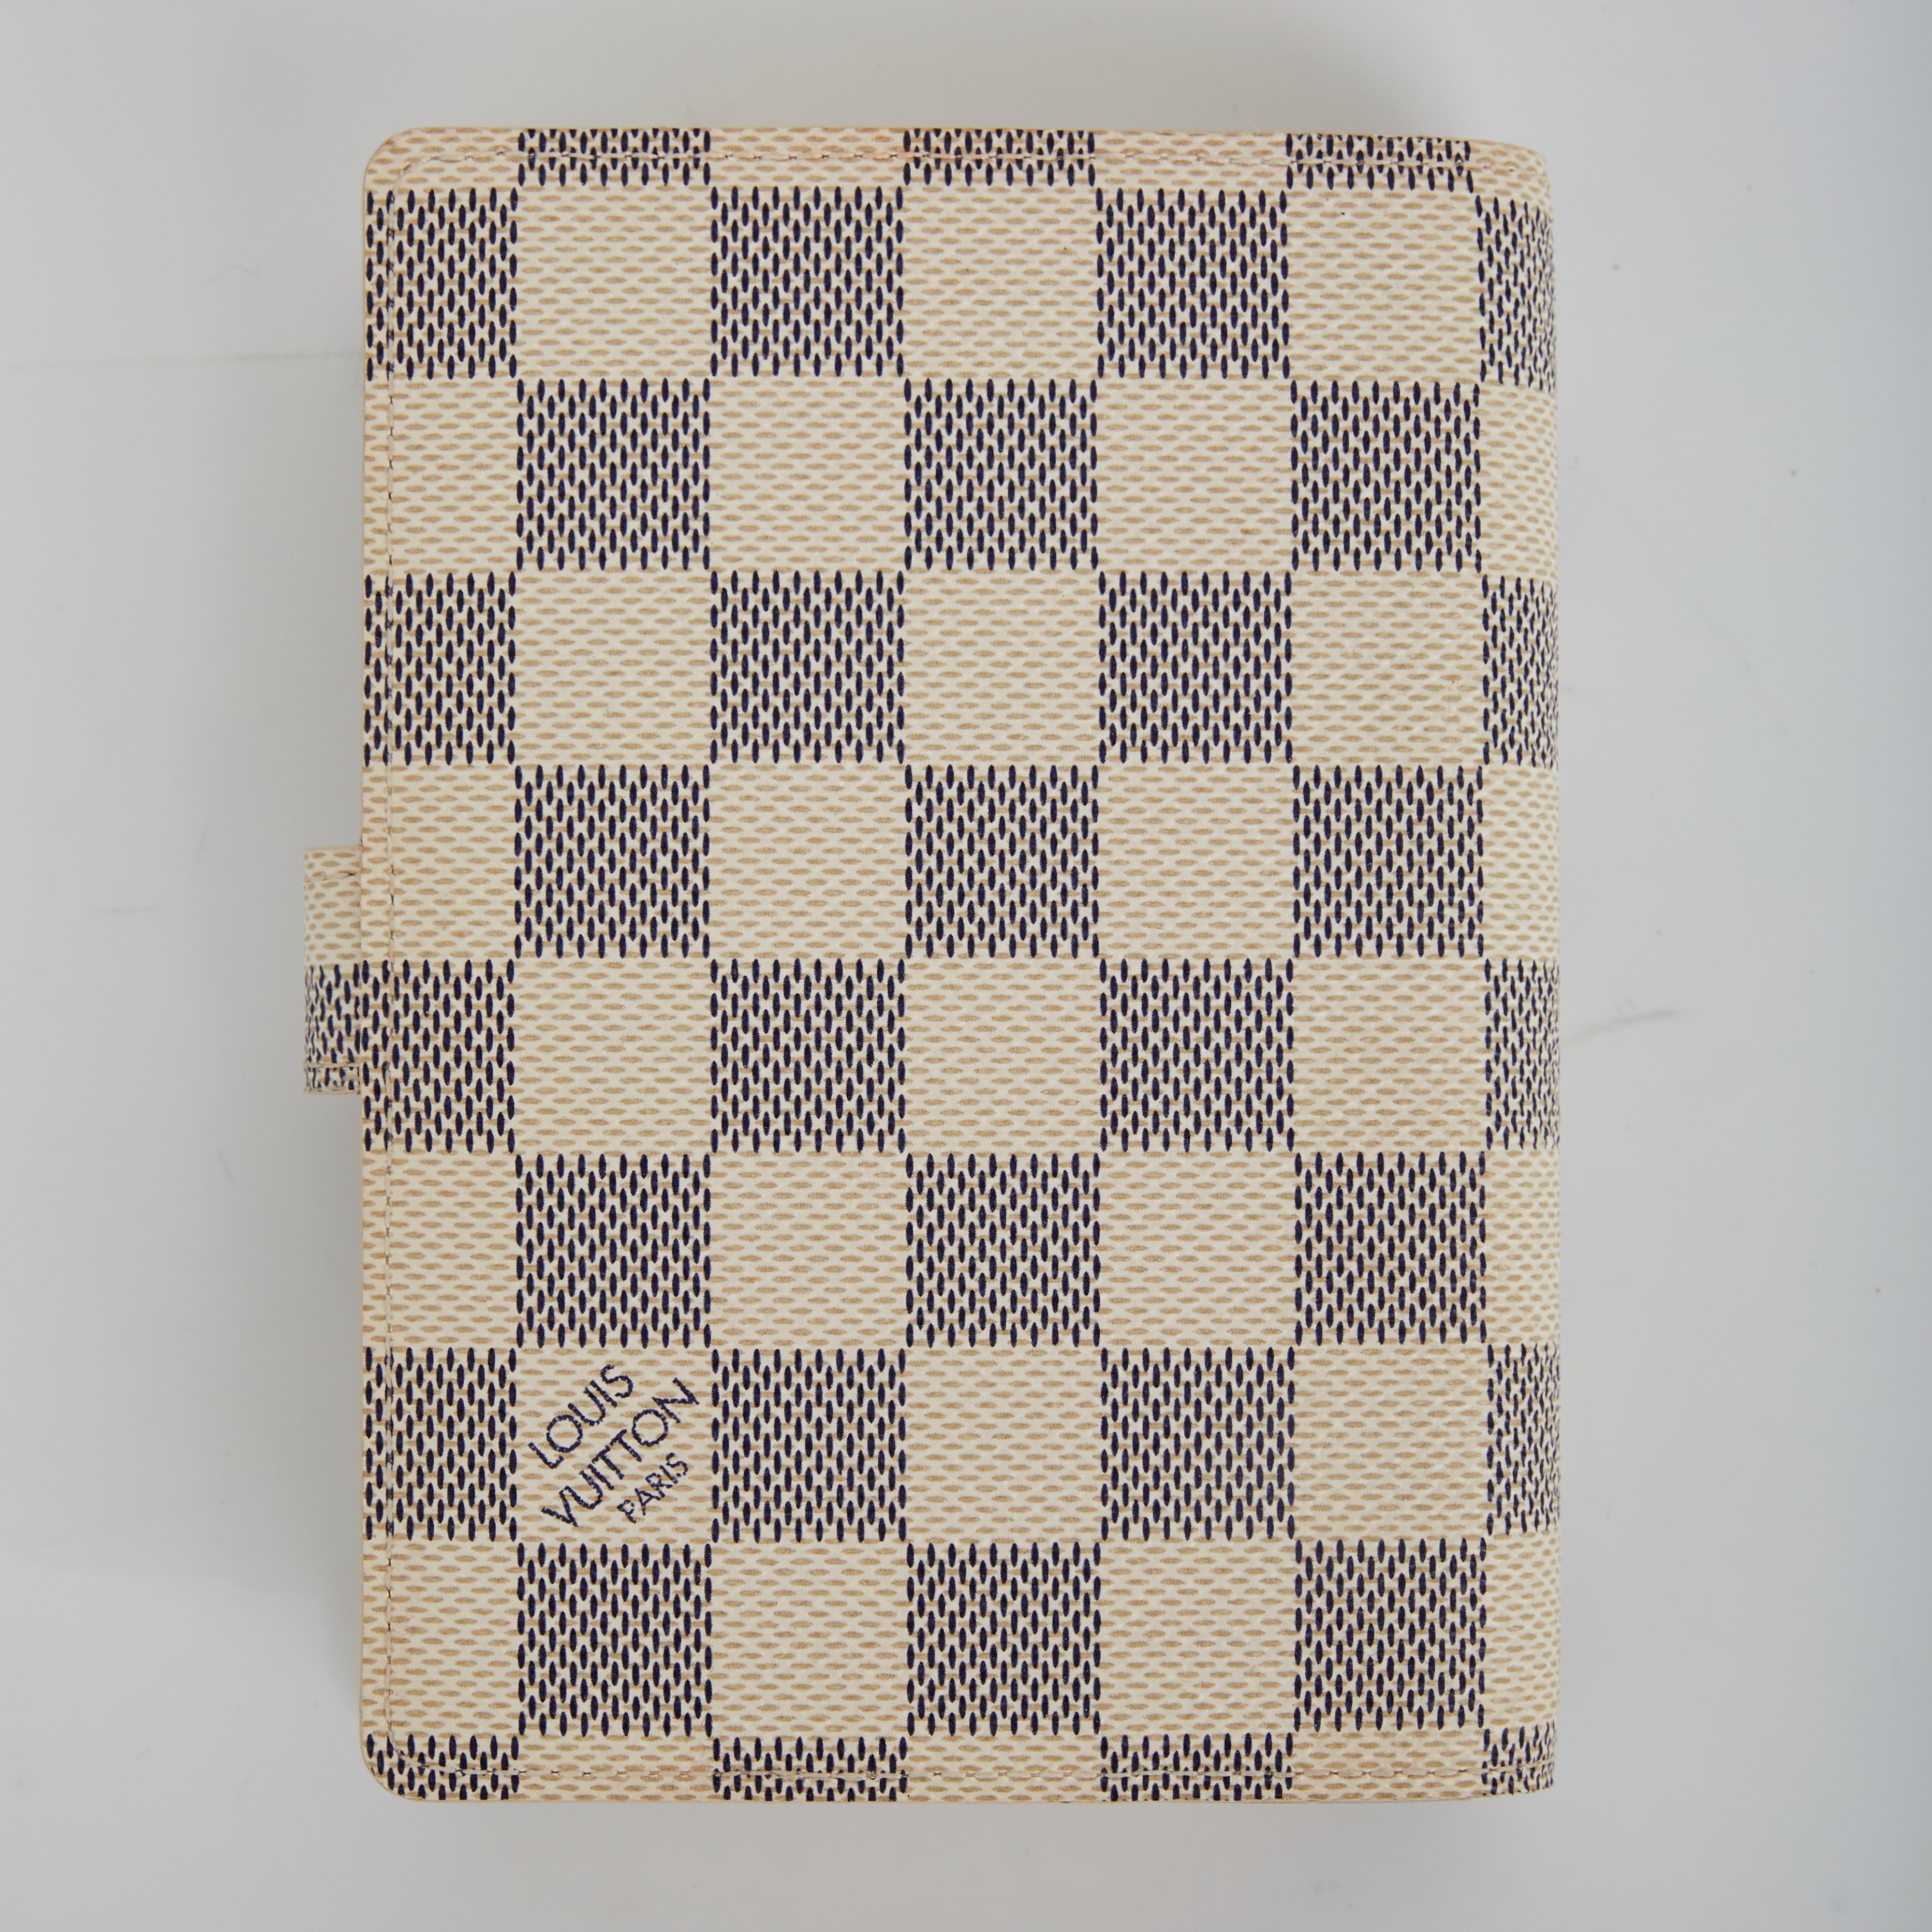 COLOR: White / Damier Azur
MATERIAL: coated canvas
DATE CODE: CA1181
MEASURES: L 4” x W 5.7”
COMES WITH: Box and original Address book paper. Comes with new white paper no brand.
CONDITION: Very good - like new with small mark. Minimal sings of